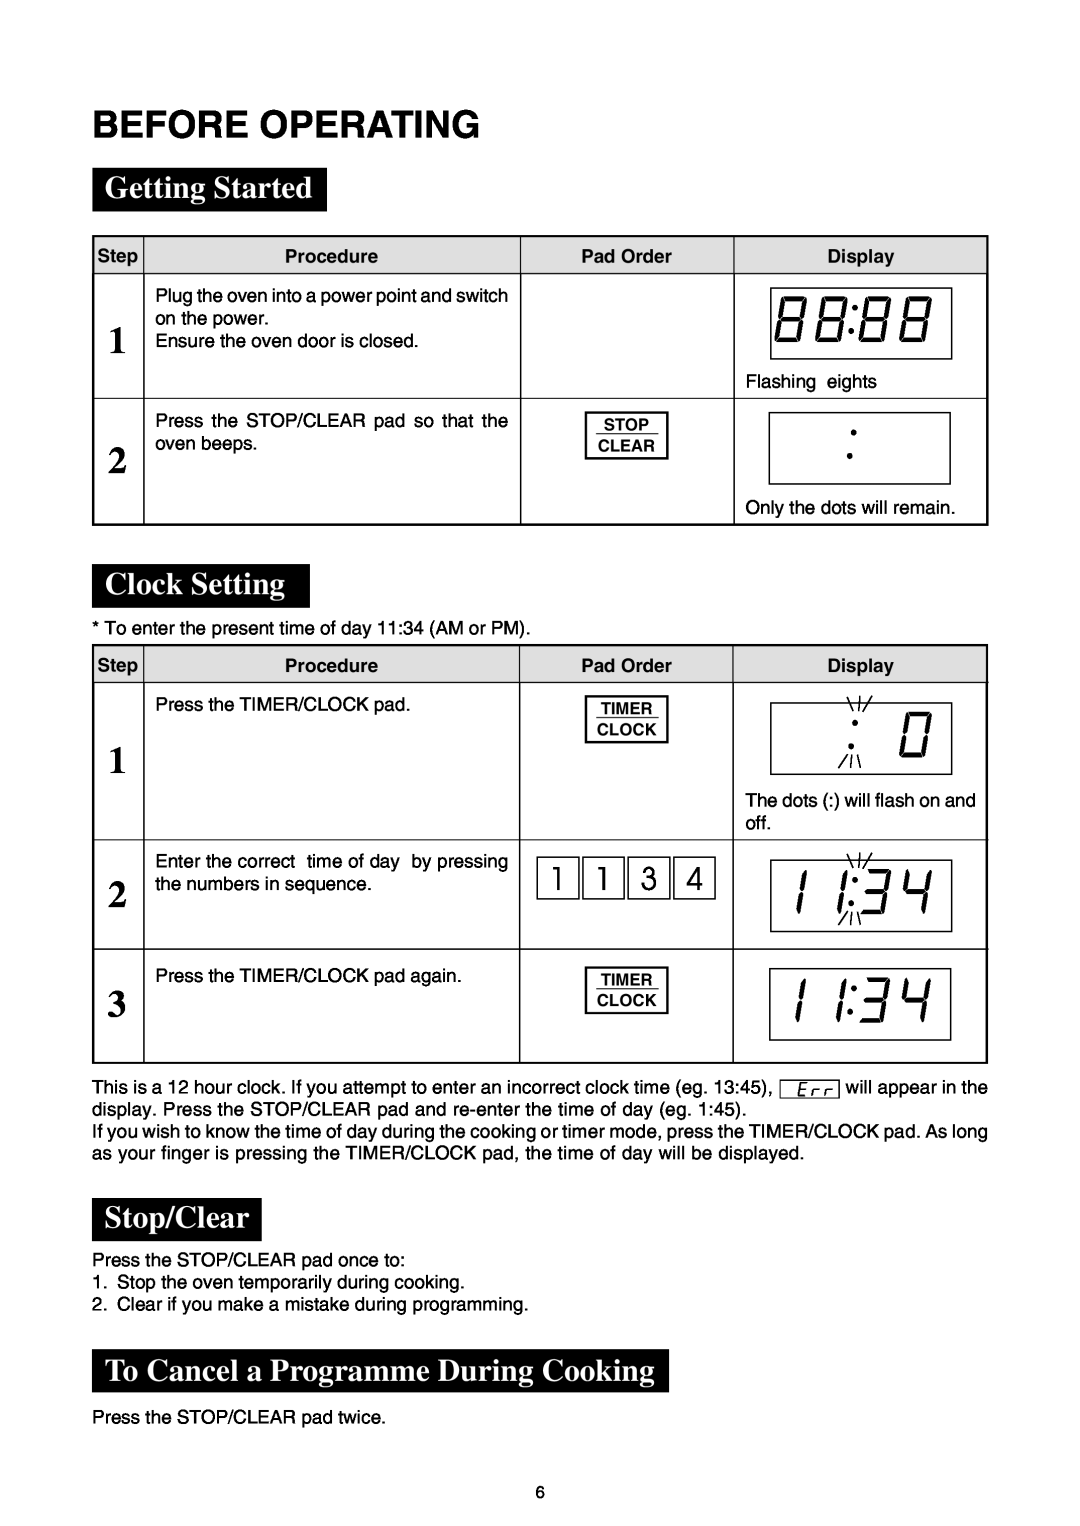 Sharp R-395F(S) Before Operating, Getting Started, Clock Setting, Stop/Clear, To Cancel a Programme During Cooking 